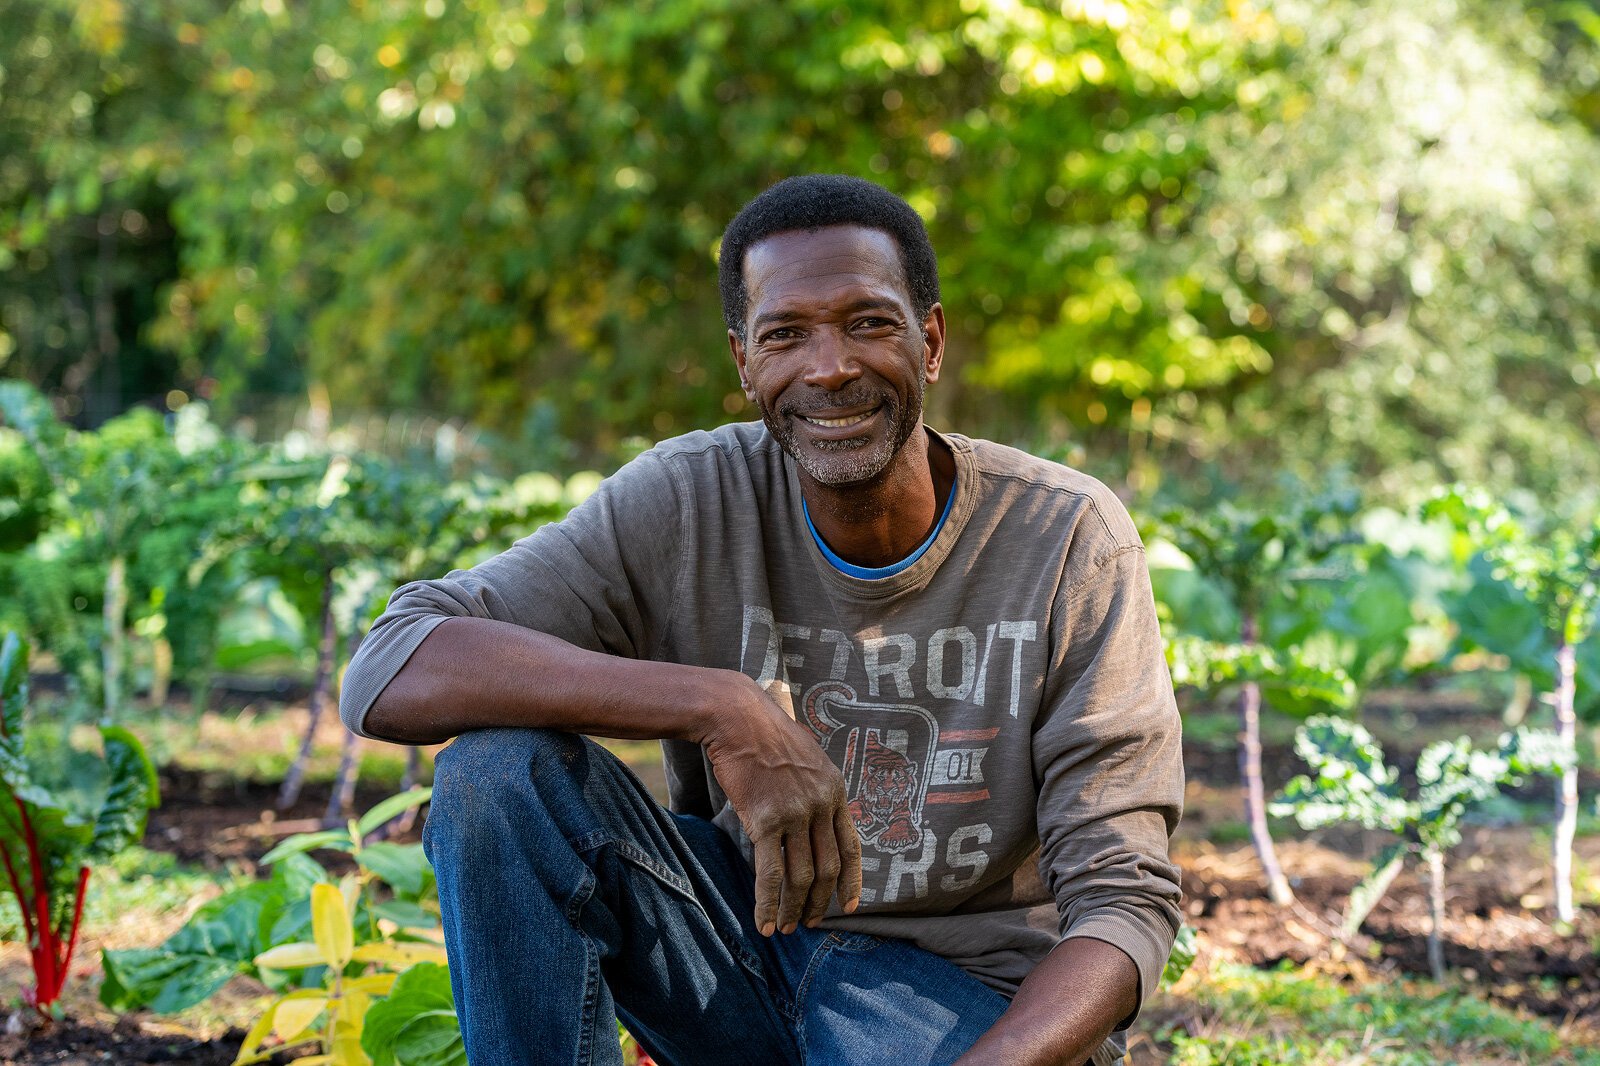 We The People Opportunity Farm founder Melvin Parson.